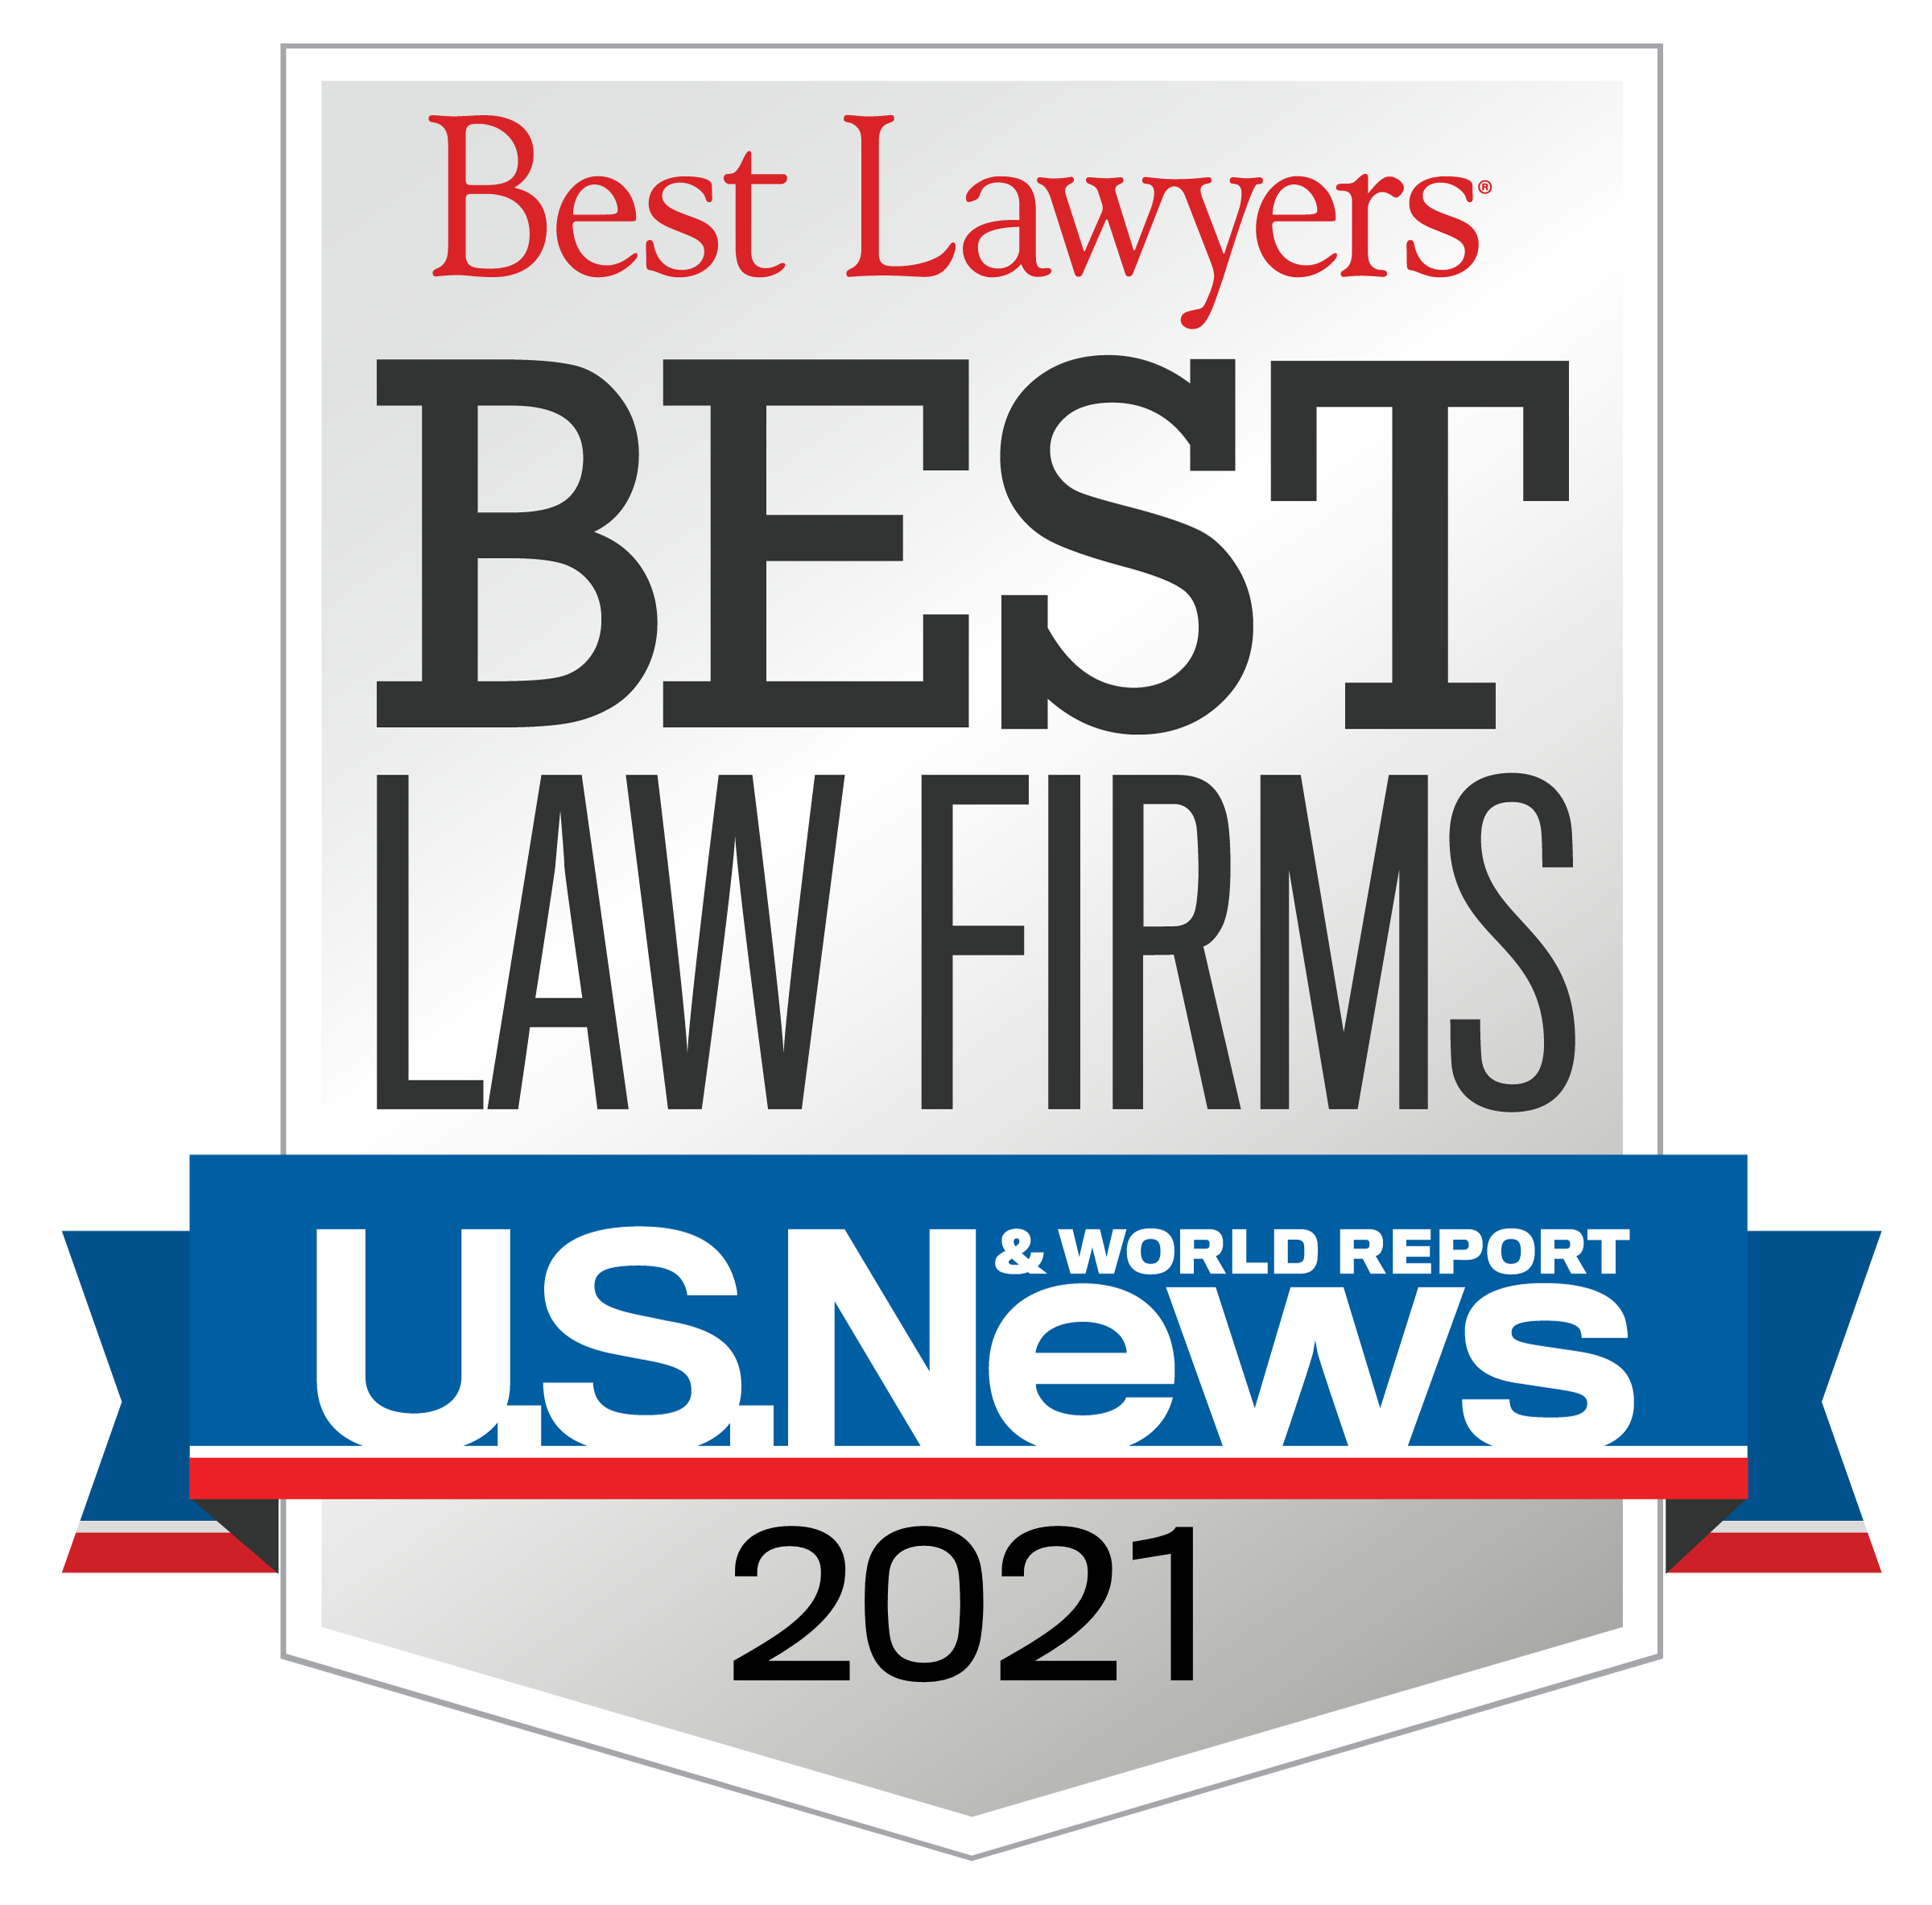 Best Lawyers Beast Law Firms 2021 badge